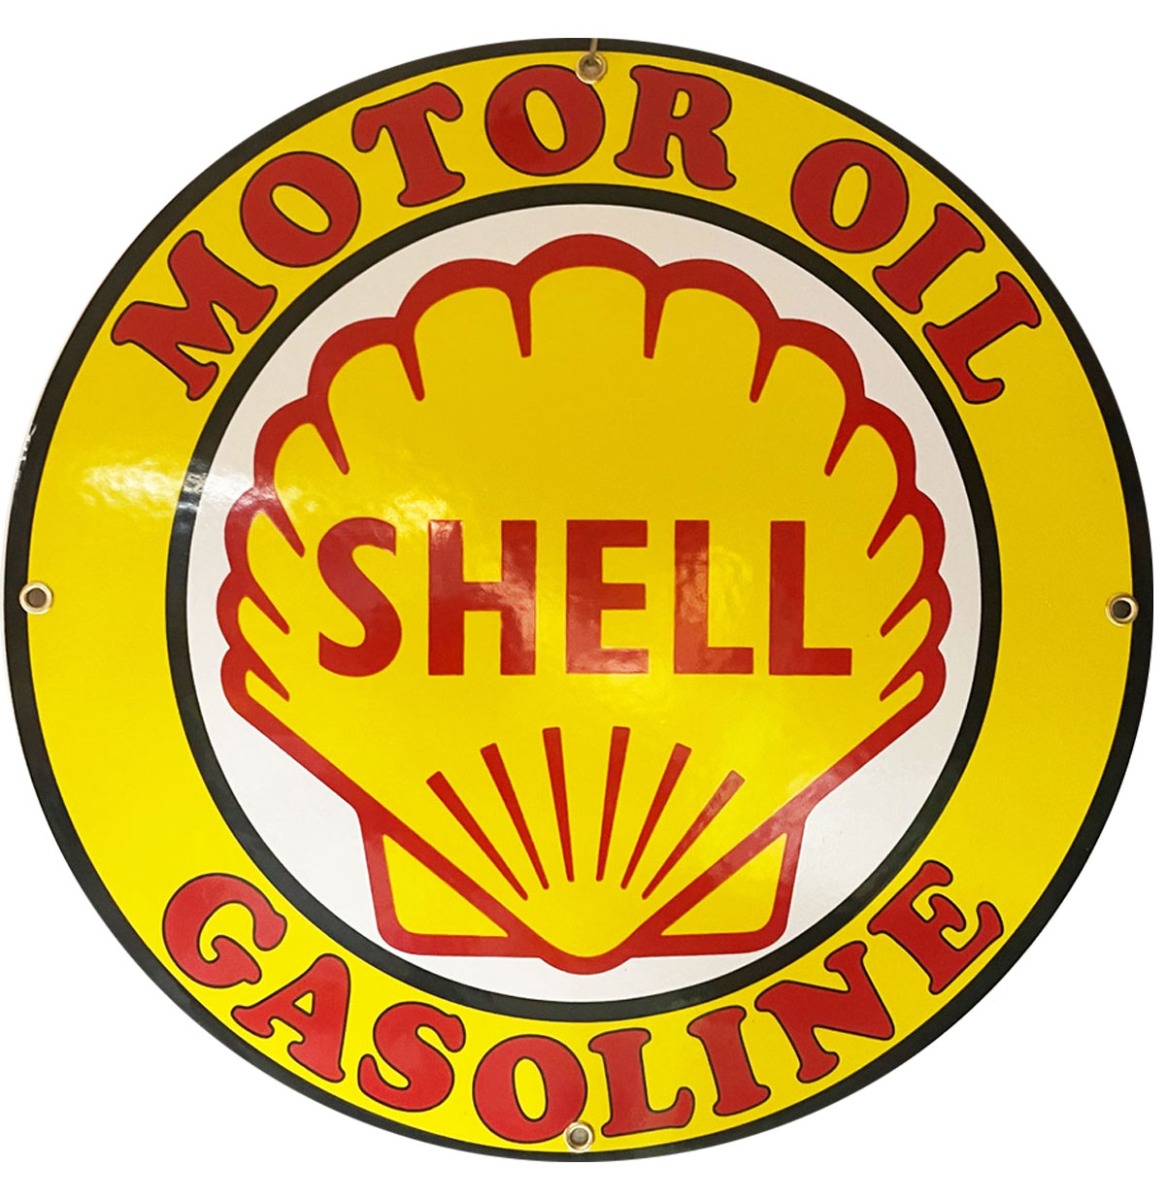 Shell Motor Oil Gasoline Rond Emaille Bord 30 cm